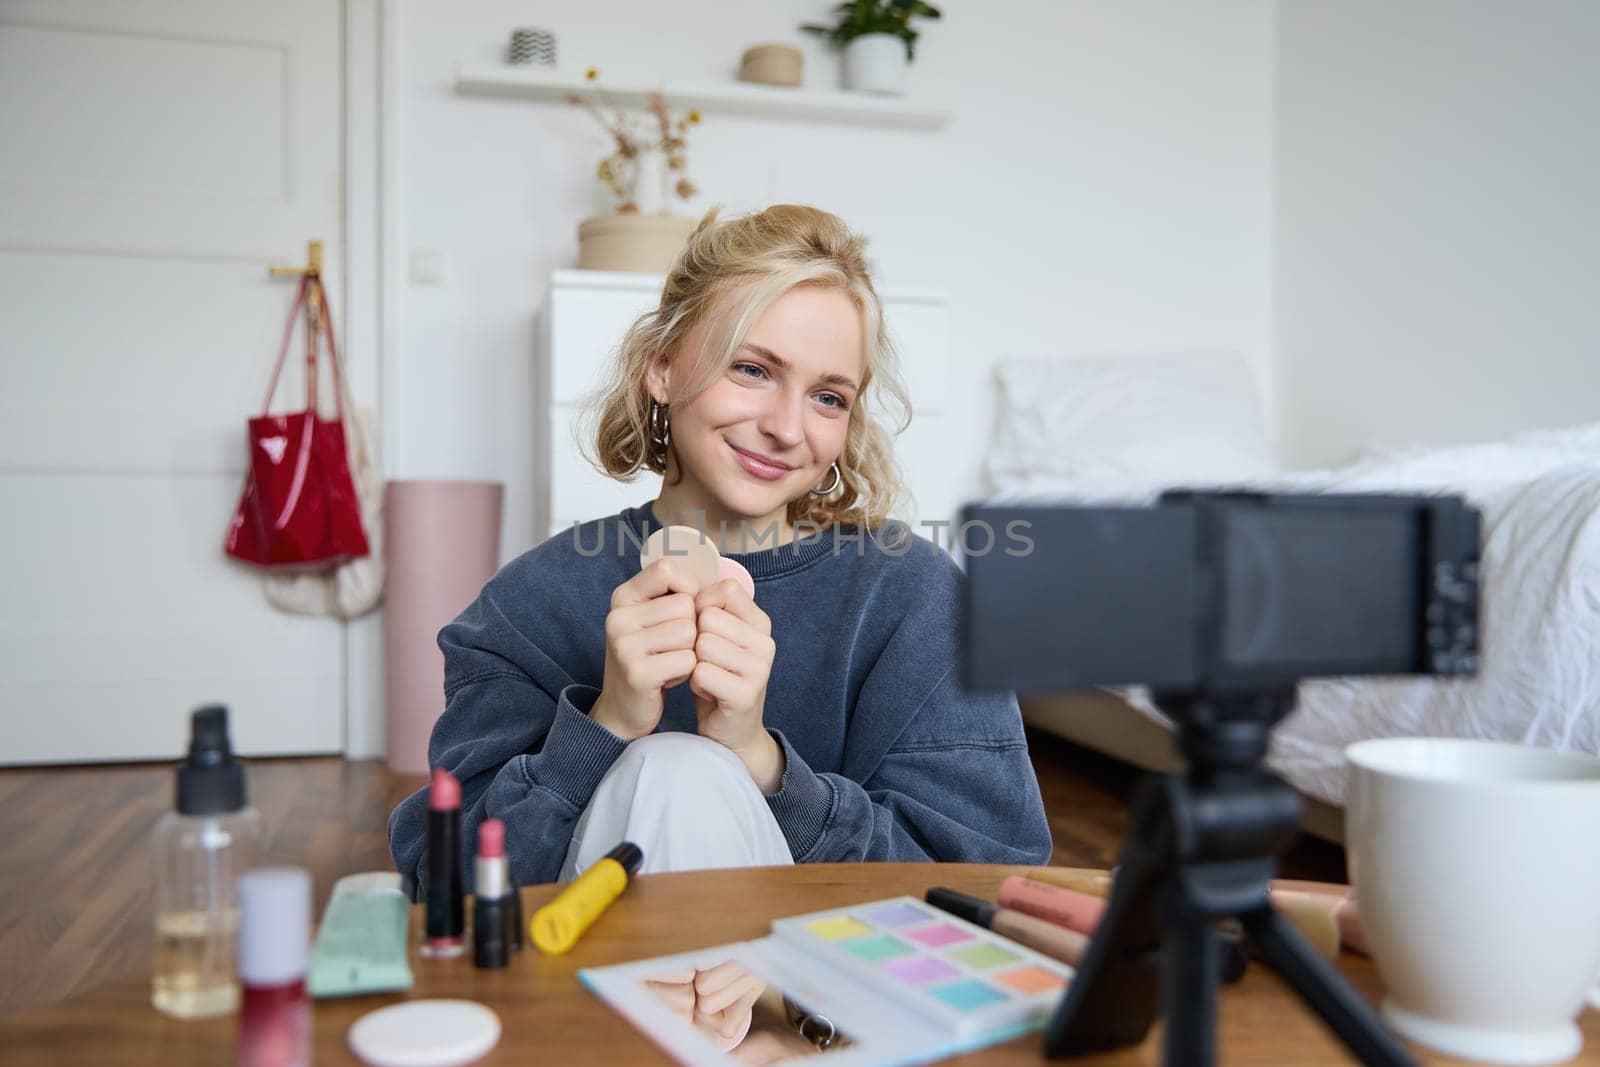 Portrait of beautiful and stylish young woman, vlogger recording video on her digital camera in a room, showing beauty products, making makeup tutorial for followers on social media.